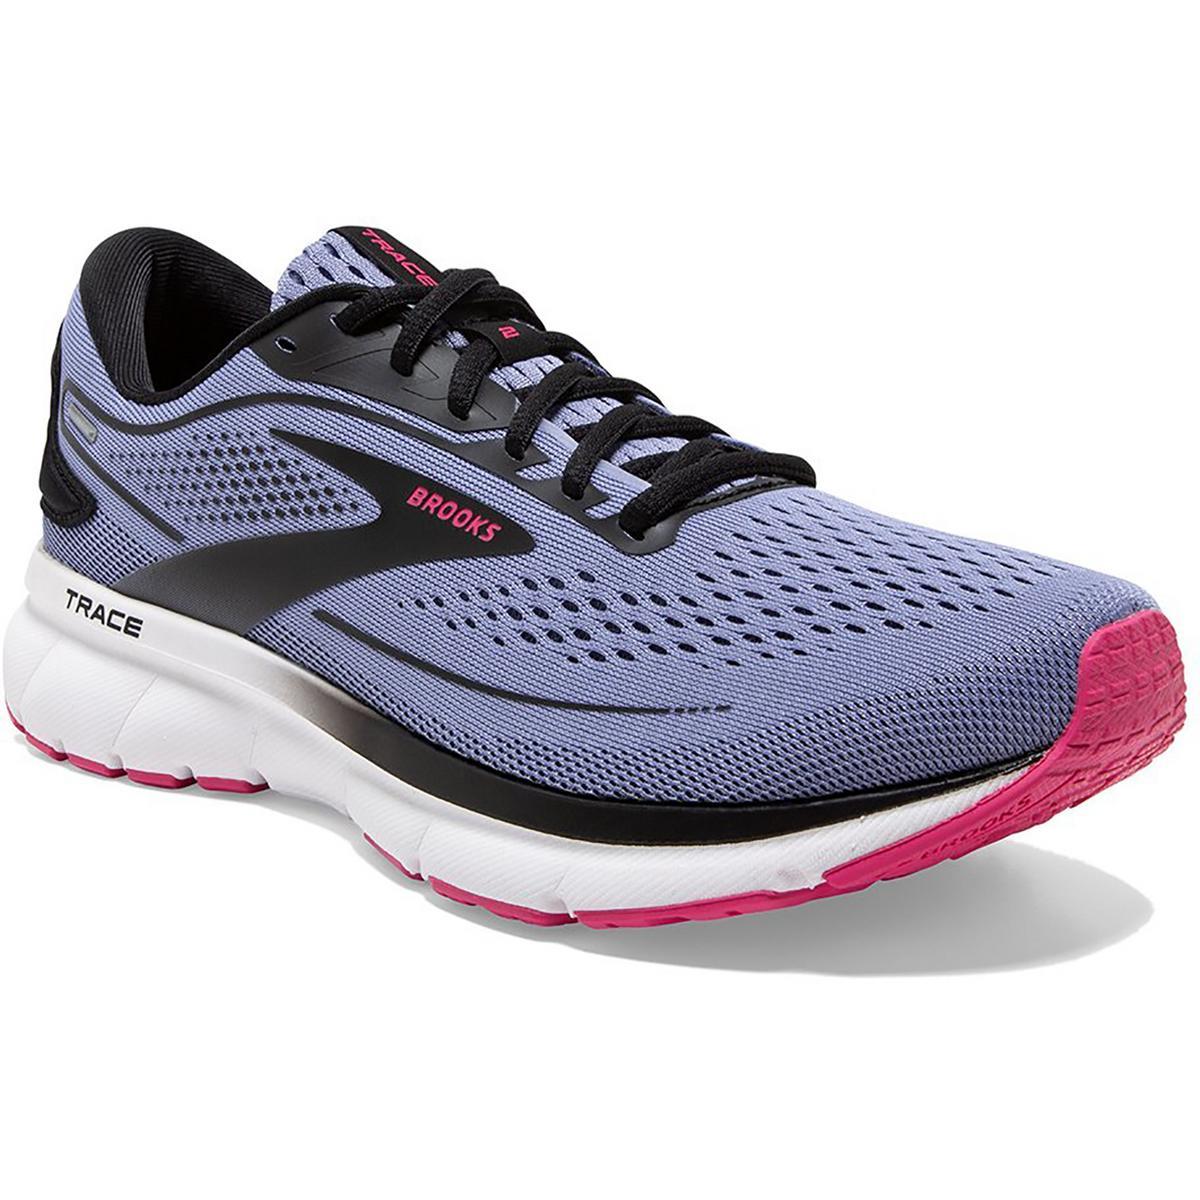 Brooks Womens Trace 2 Performance Fitness Running Shoes Sneakers Bhfo 3263 Purple Impression/ Black/Pink